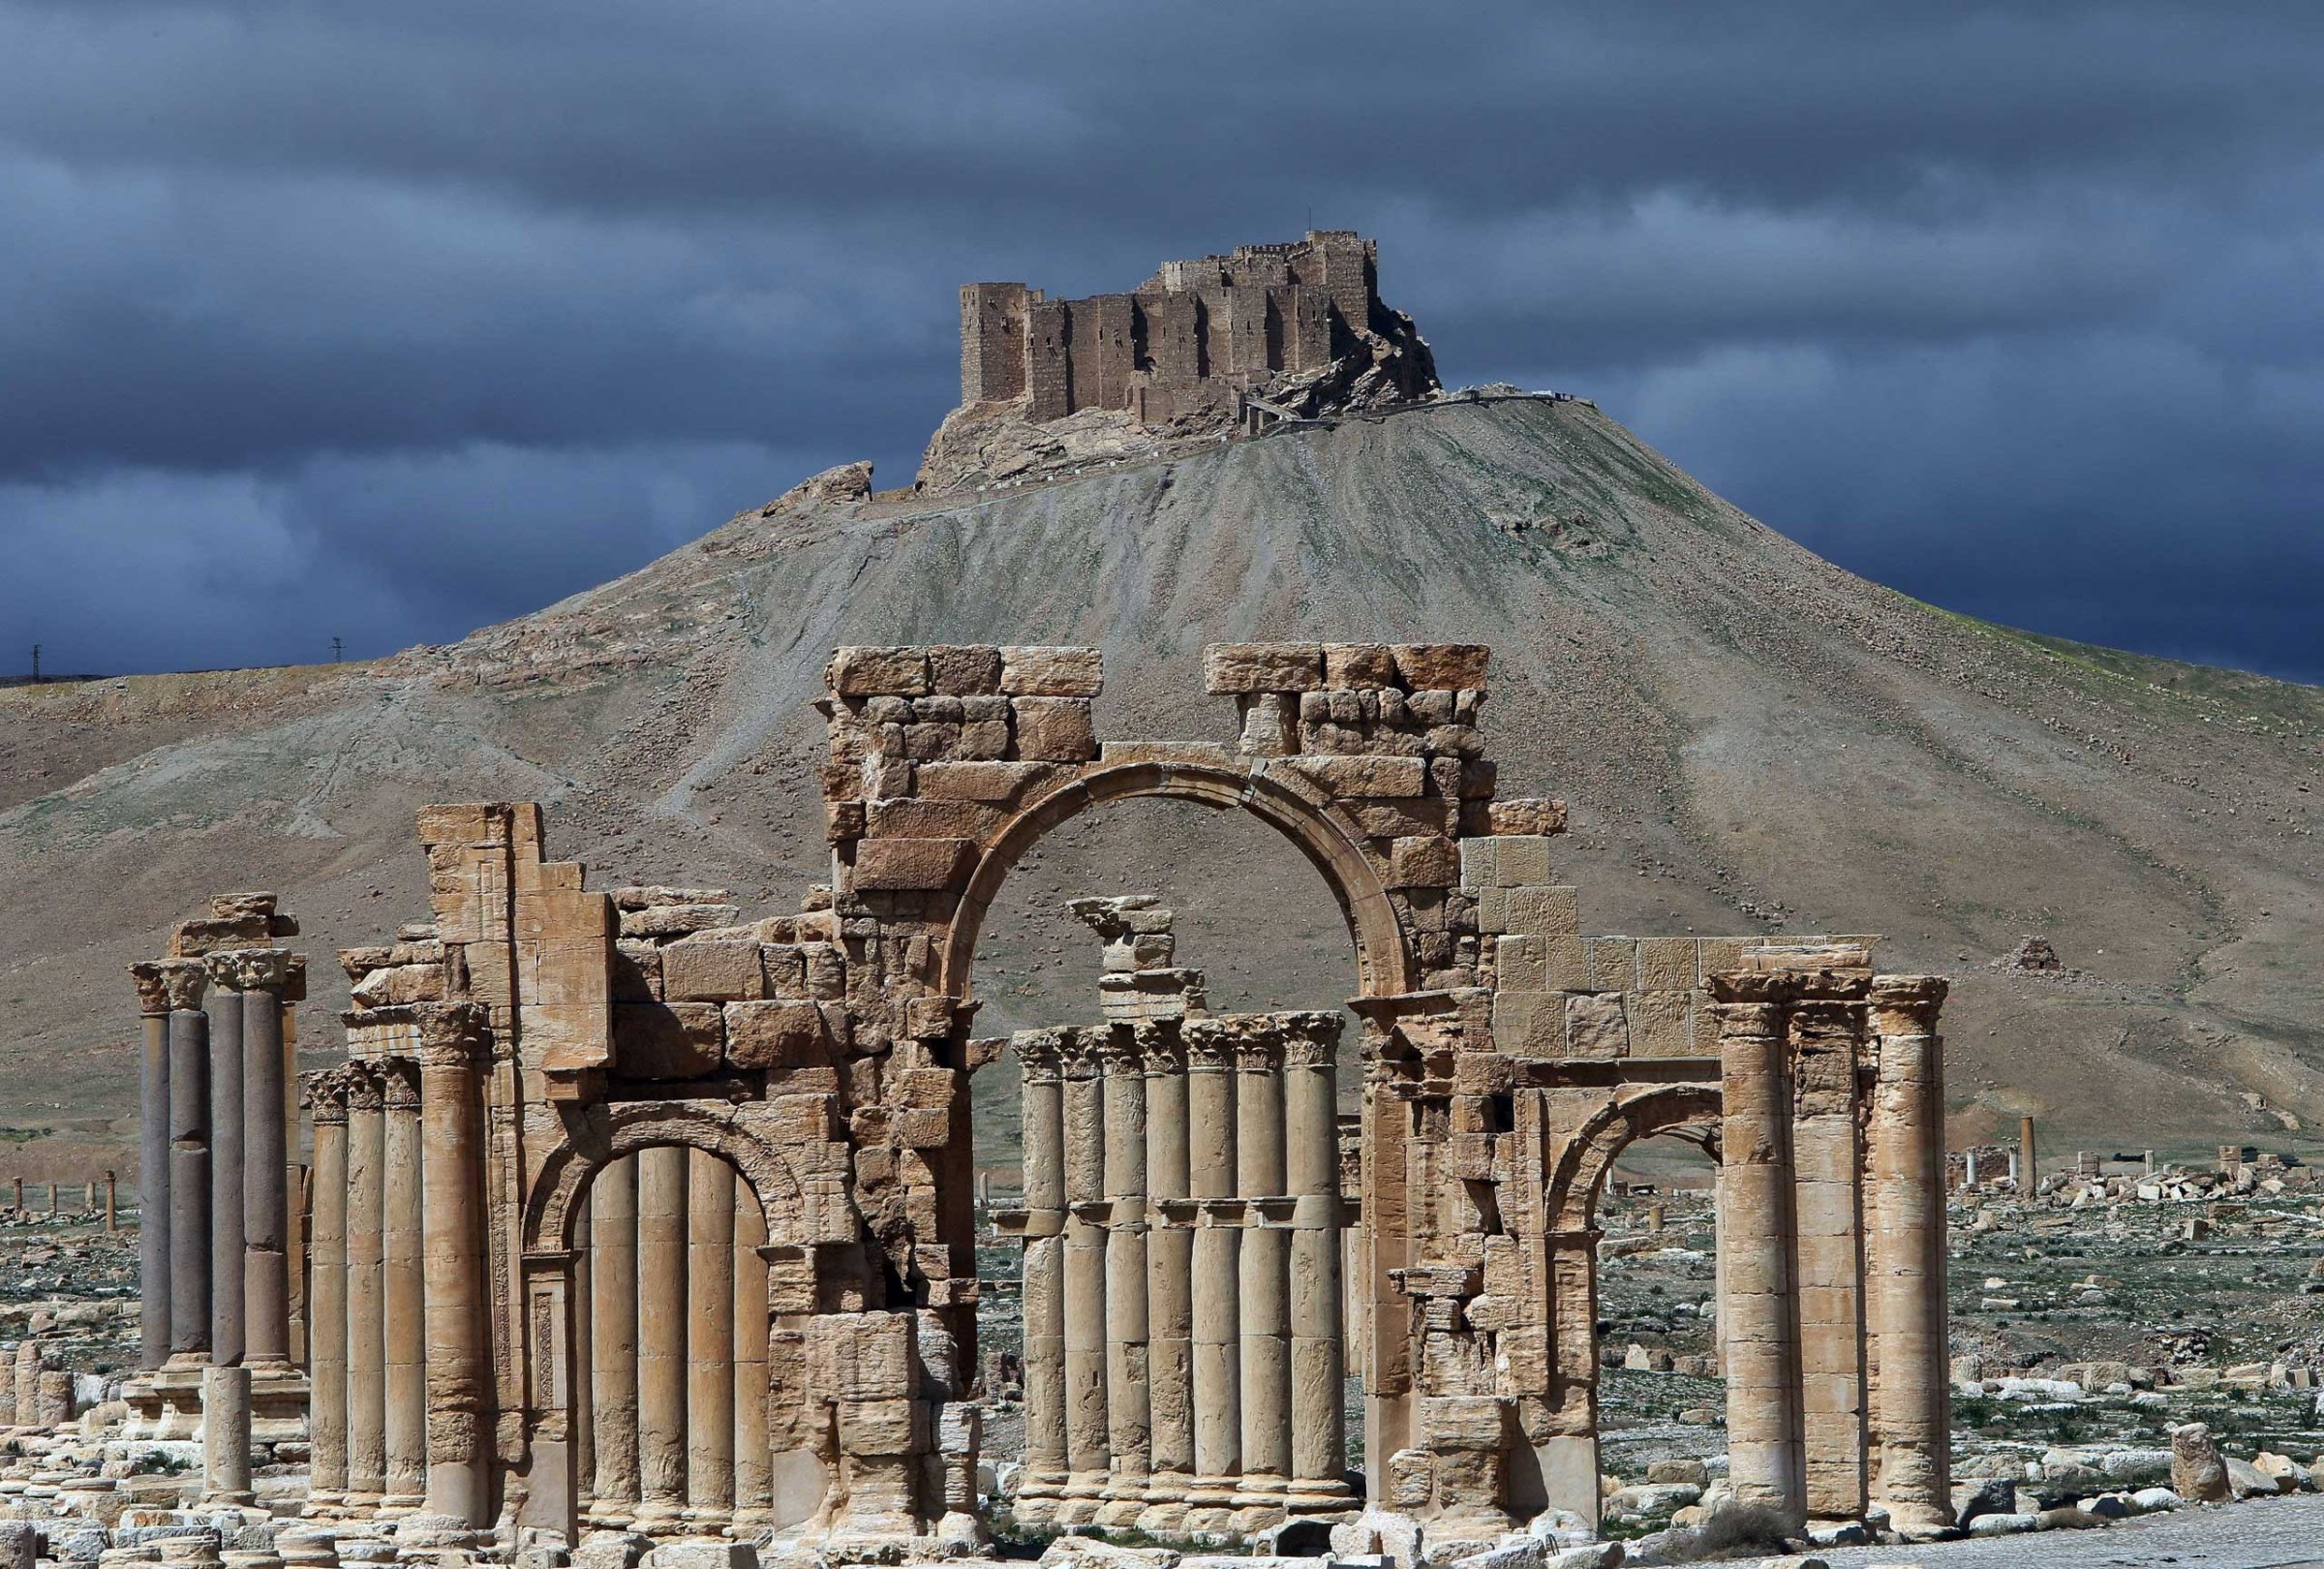 Part of the ancient oasis city of Palmyra, Syria in 2014.